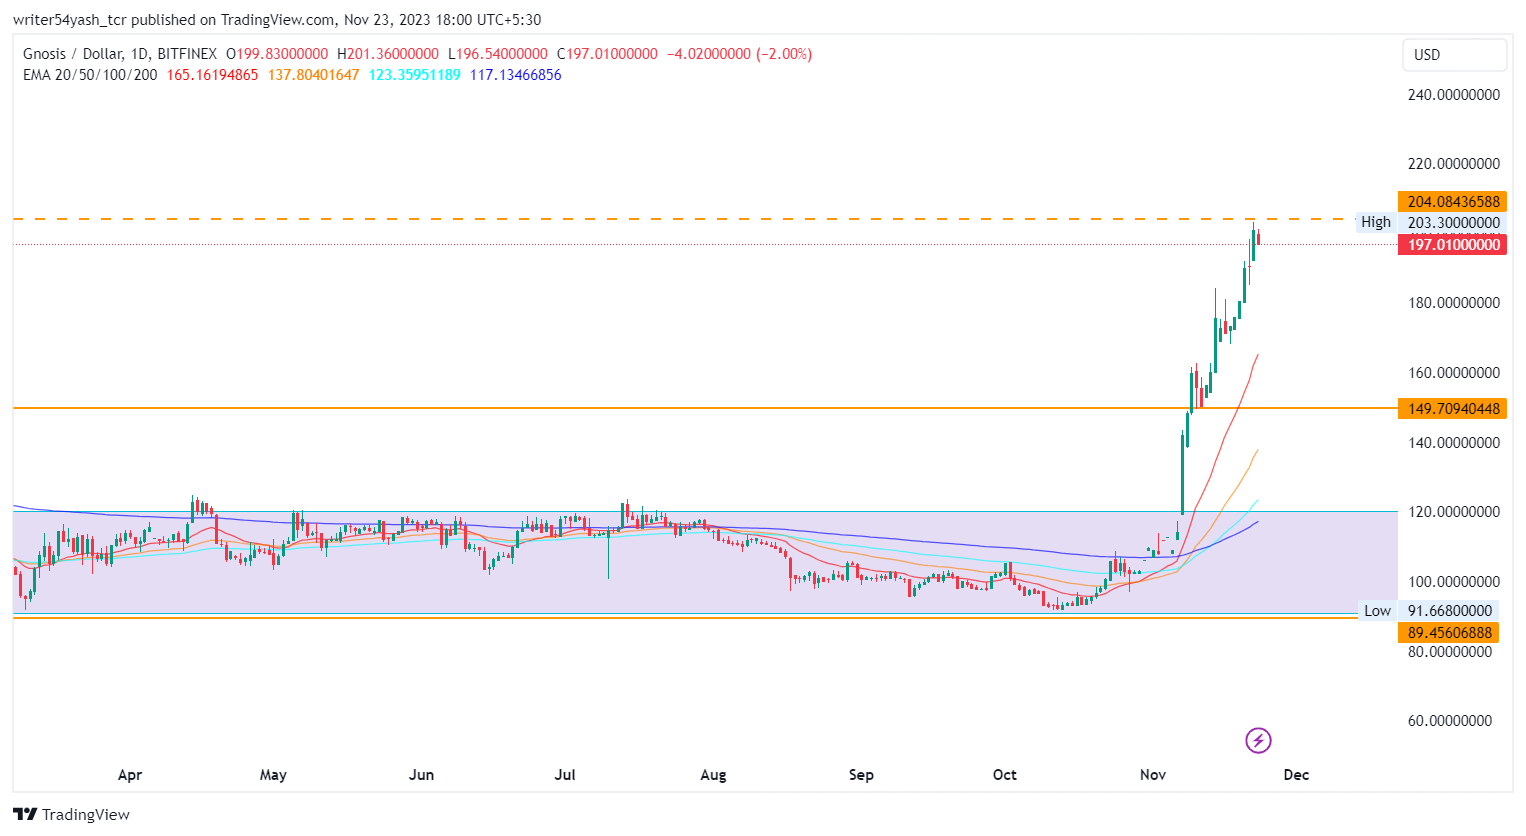 Will Gnosis Price (GNO) be Able to Hold the Recent Gains?